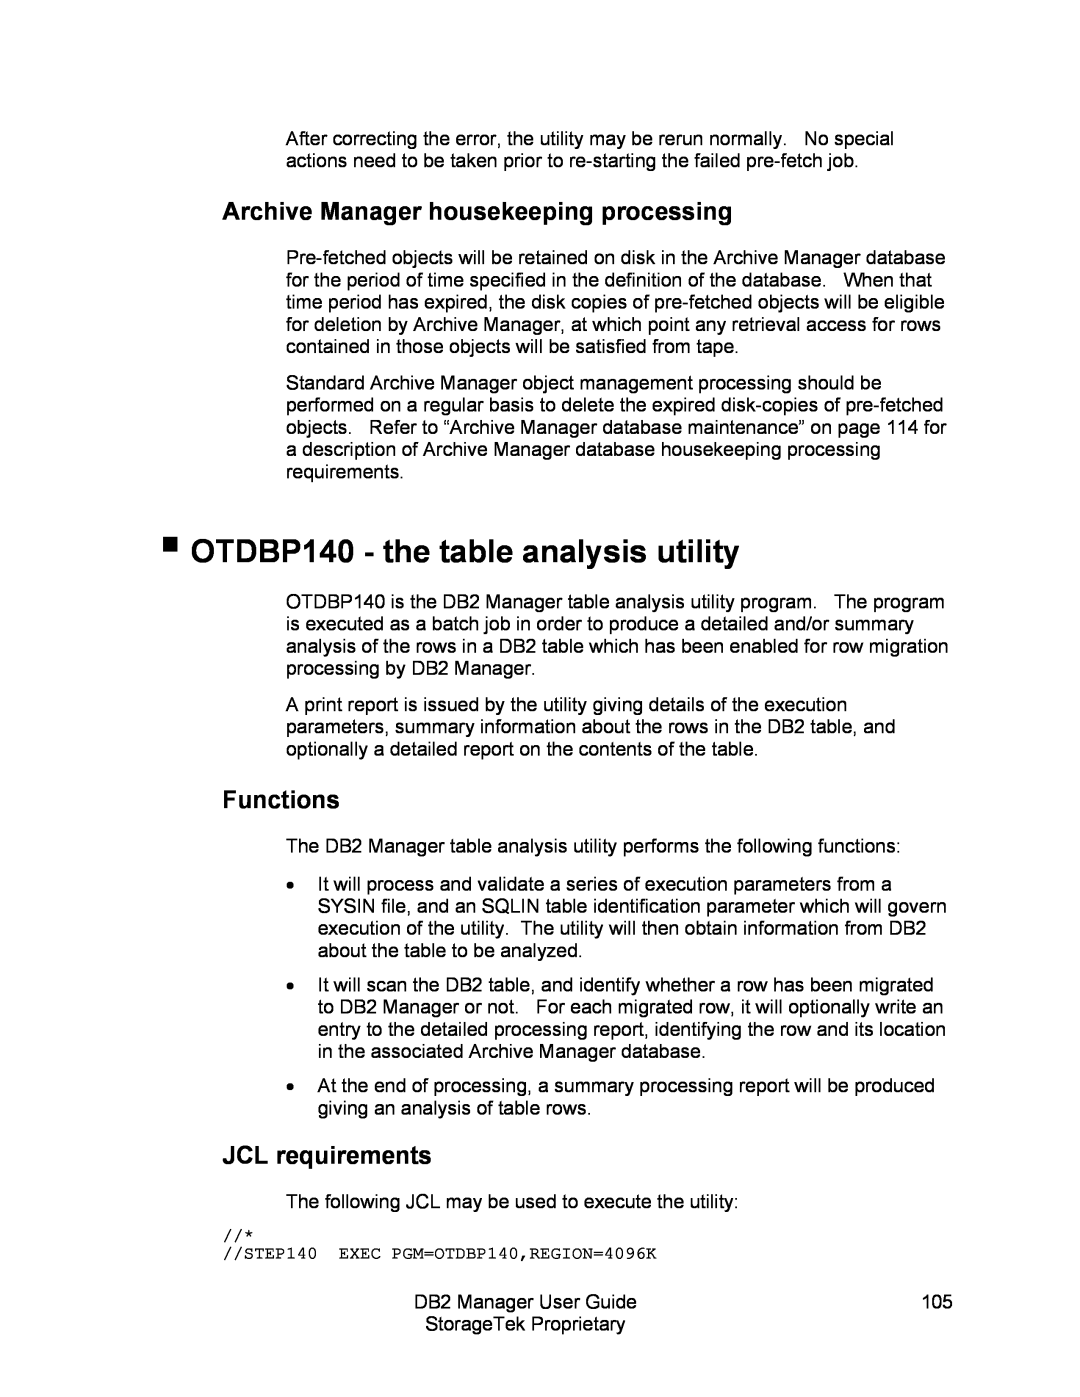 StorageTek 312564001 manual OTDBP140 - the table analysis utility, Archive Manager housekeeping processing, Functions 